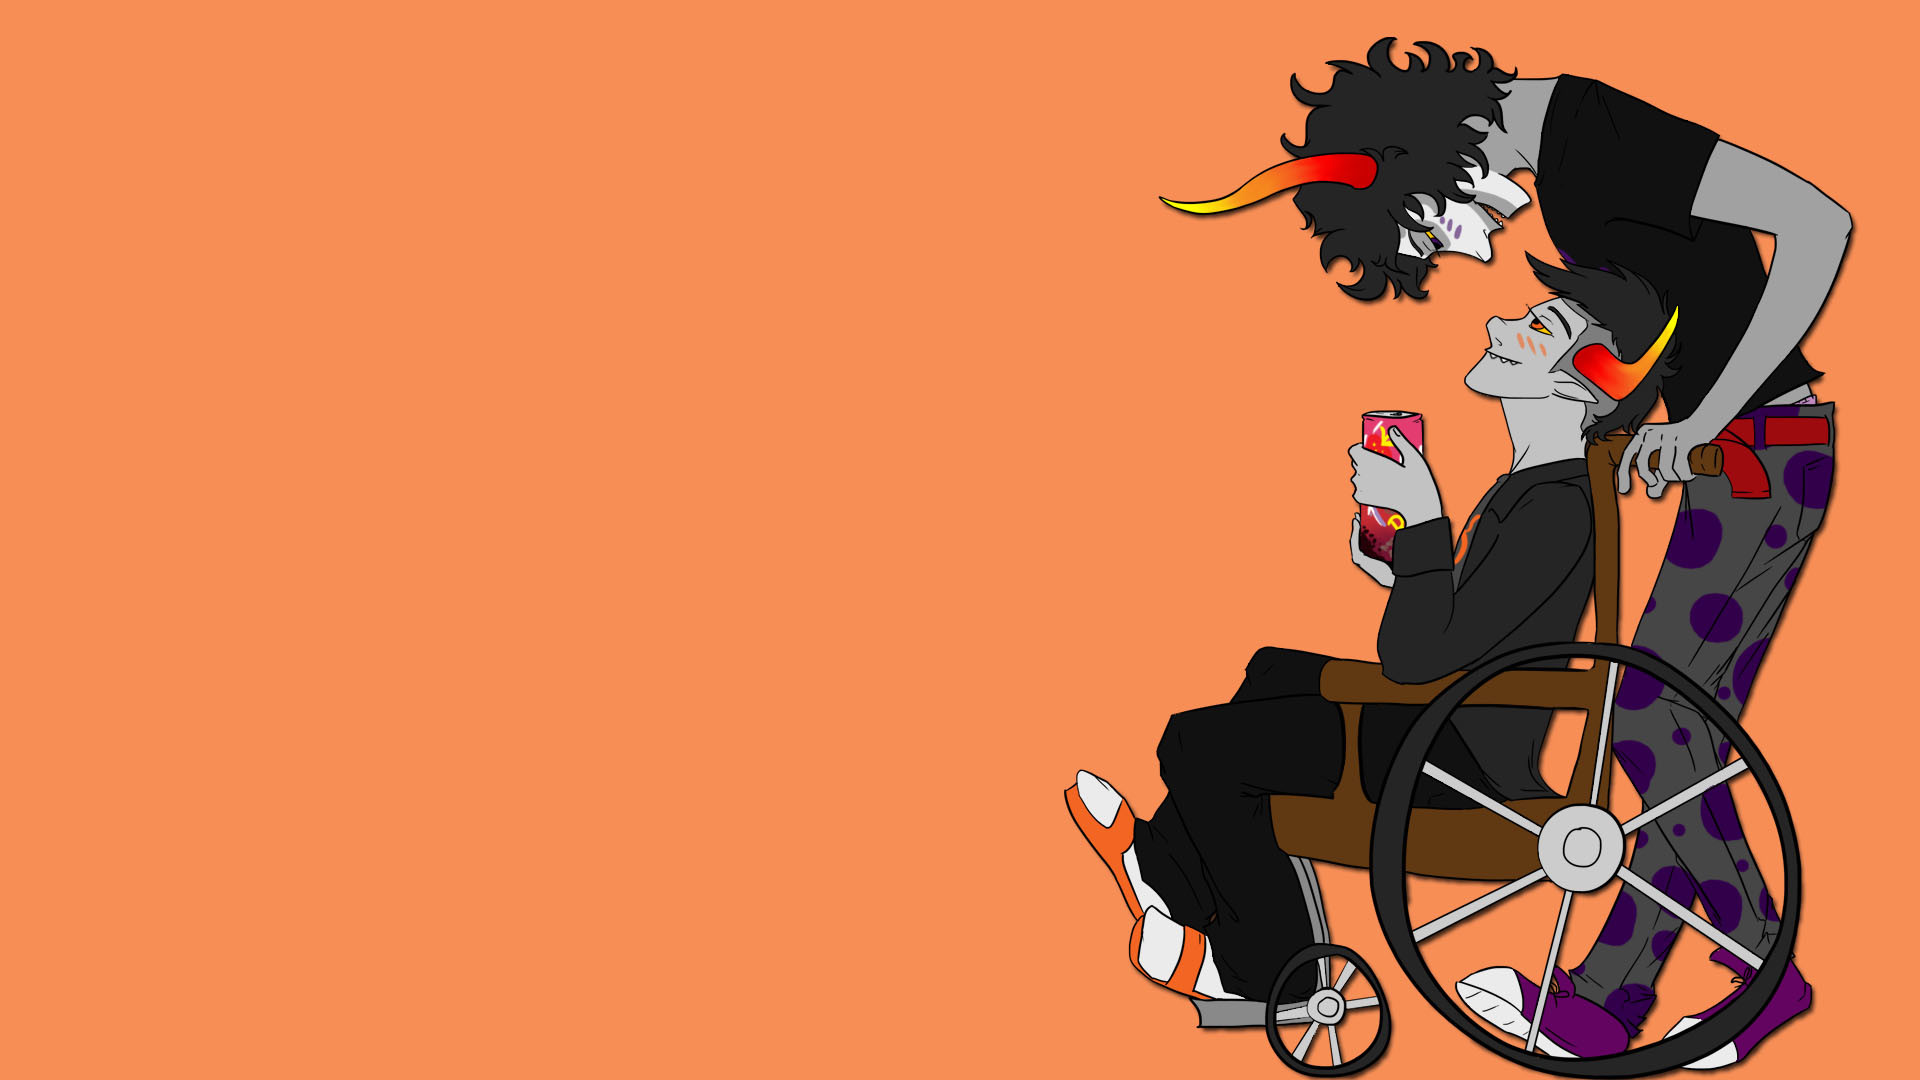 1920x1080 Homestuck: Gamzee and Tavros by SurlySkies